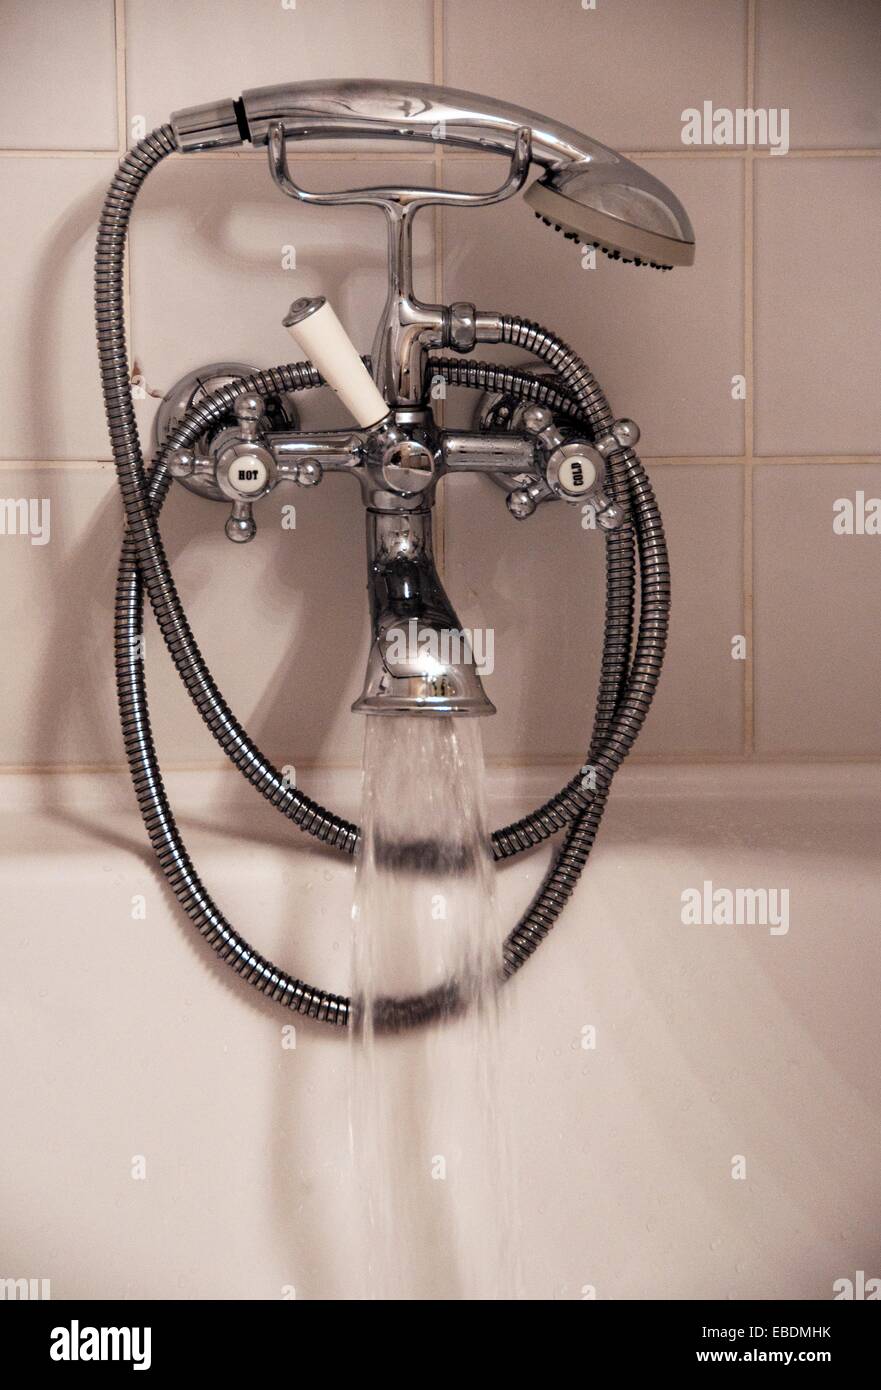 Bathroom Water Pouring To Bathtub From Old Fashioned Water Faucet